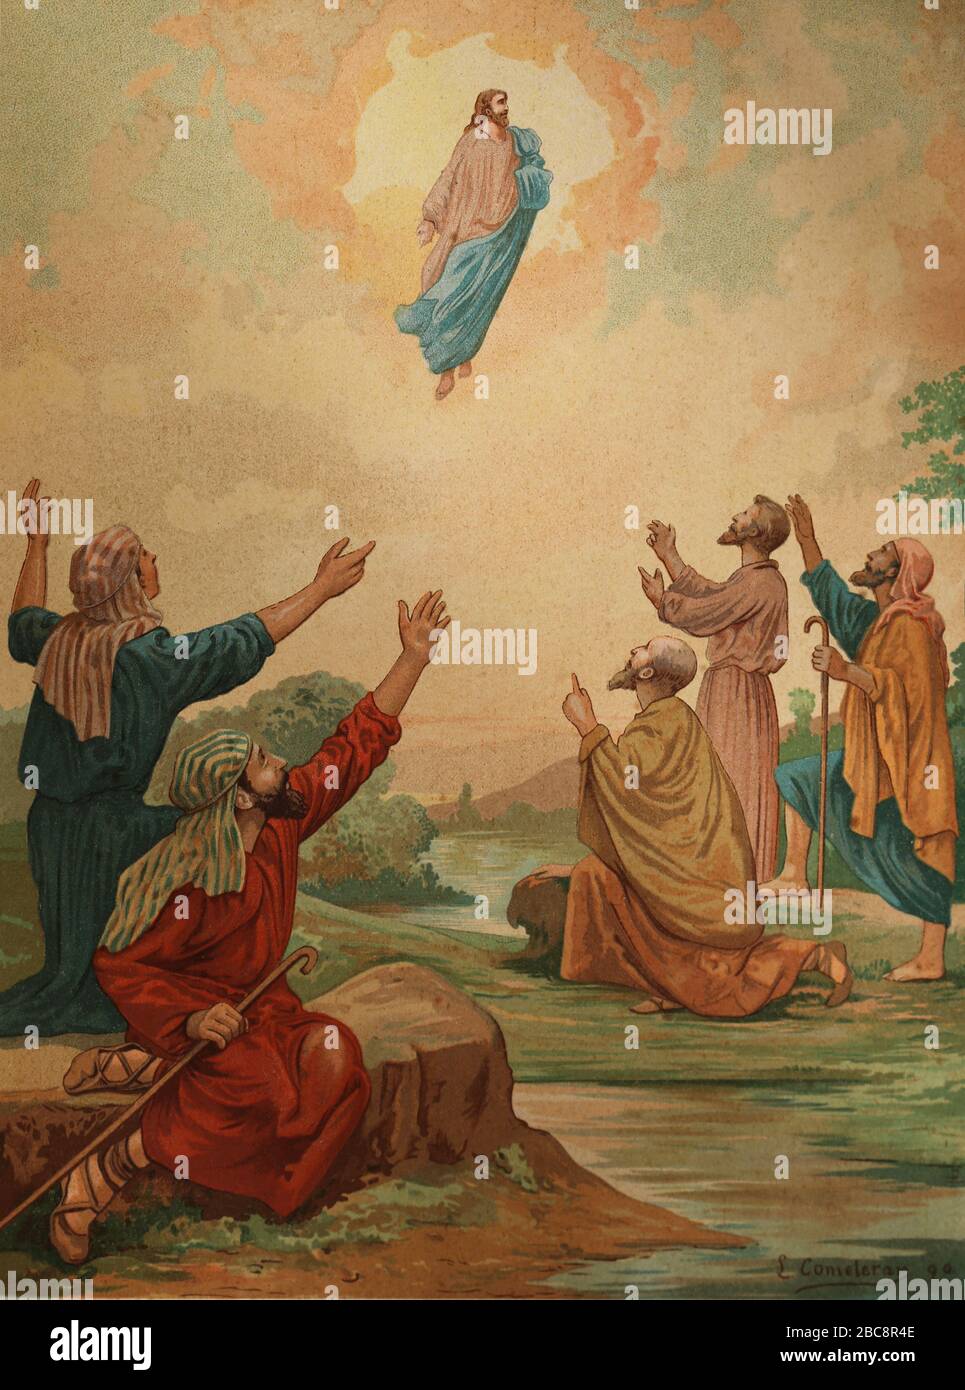 The Ascension of Jesus. Lithography, Holy Bible, 19th century. Stock Photo